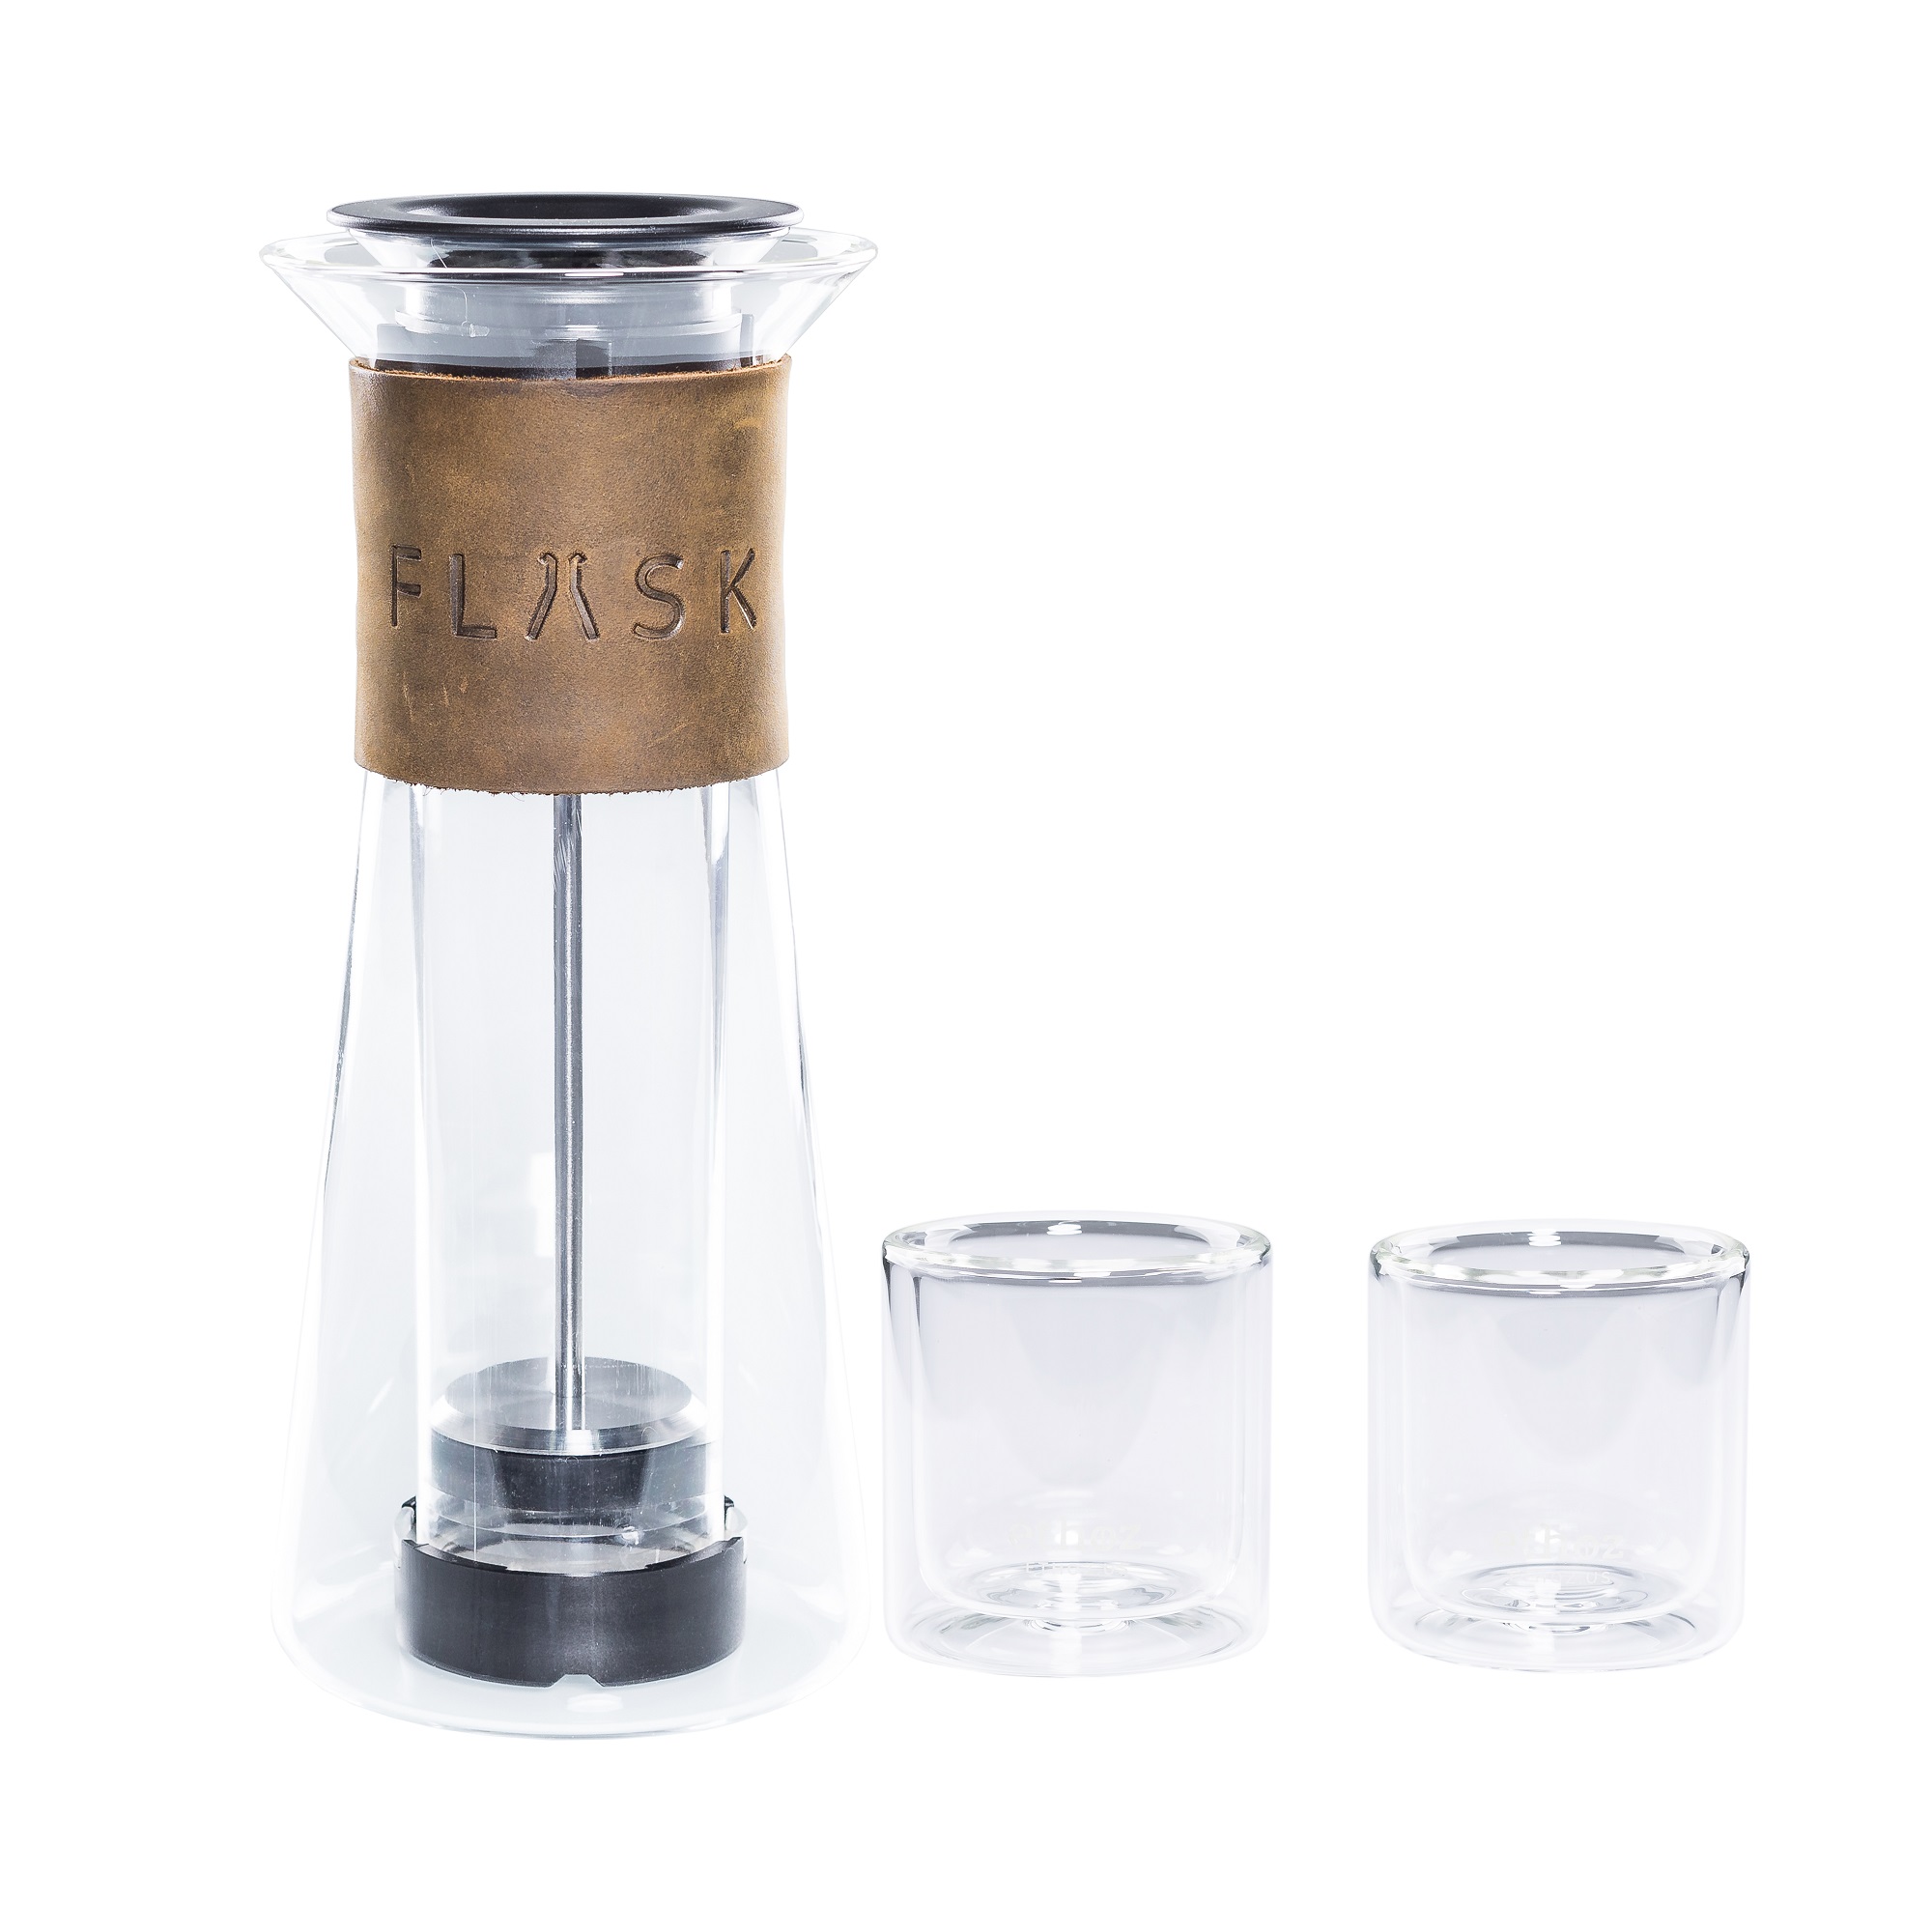 https://planetarydesign.com/wp-content/uploads/2021/02/ethoz_glass_tumblers_Clear_Glass_FKTM08_flask_and_cups_3_web.jpg